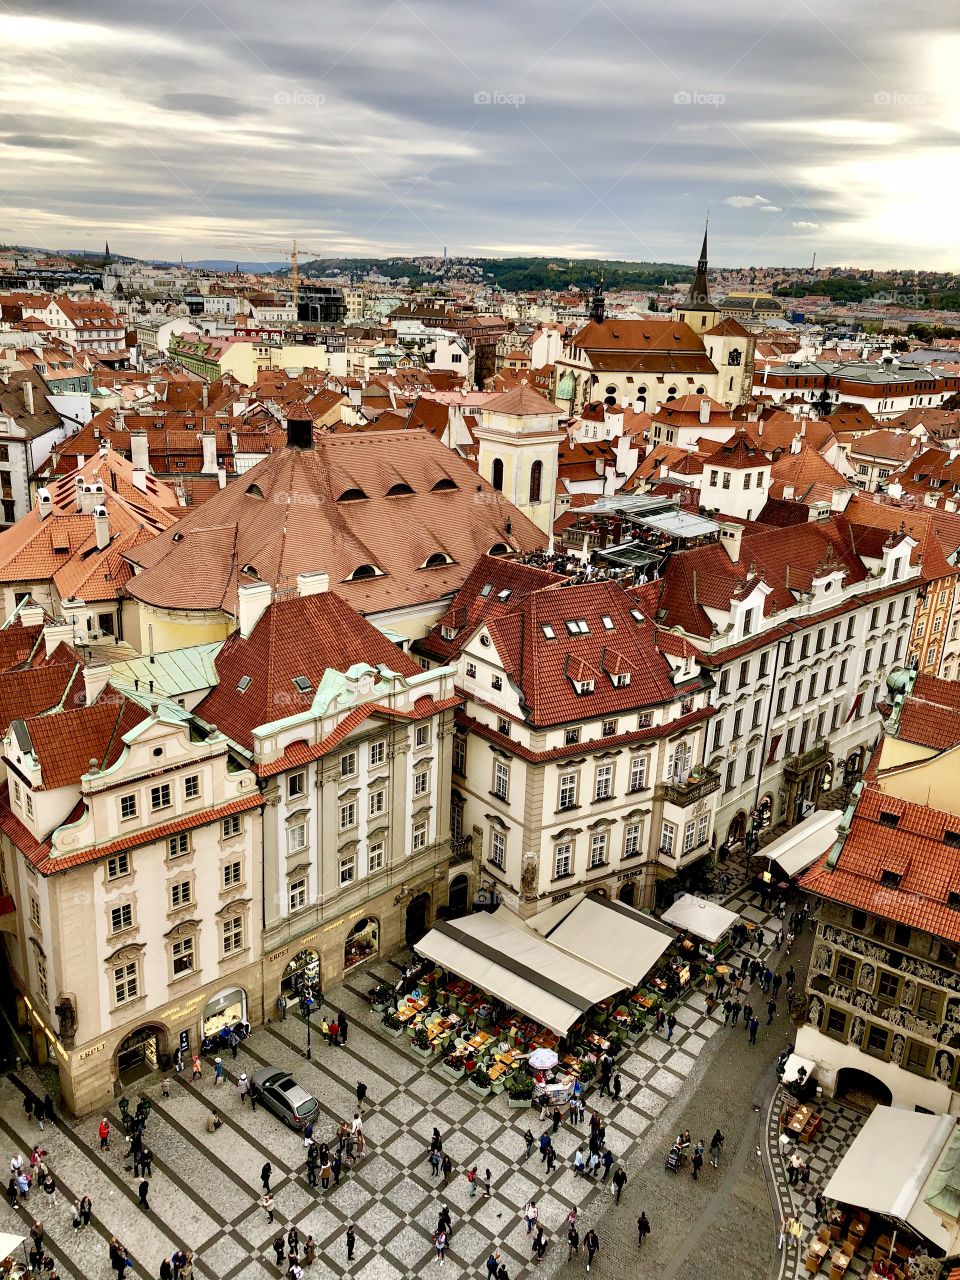 The beautiful city of Praha seen from the top